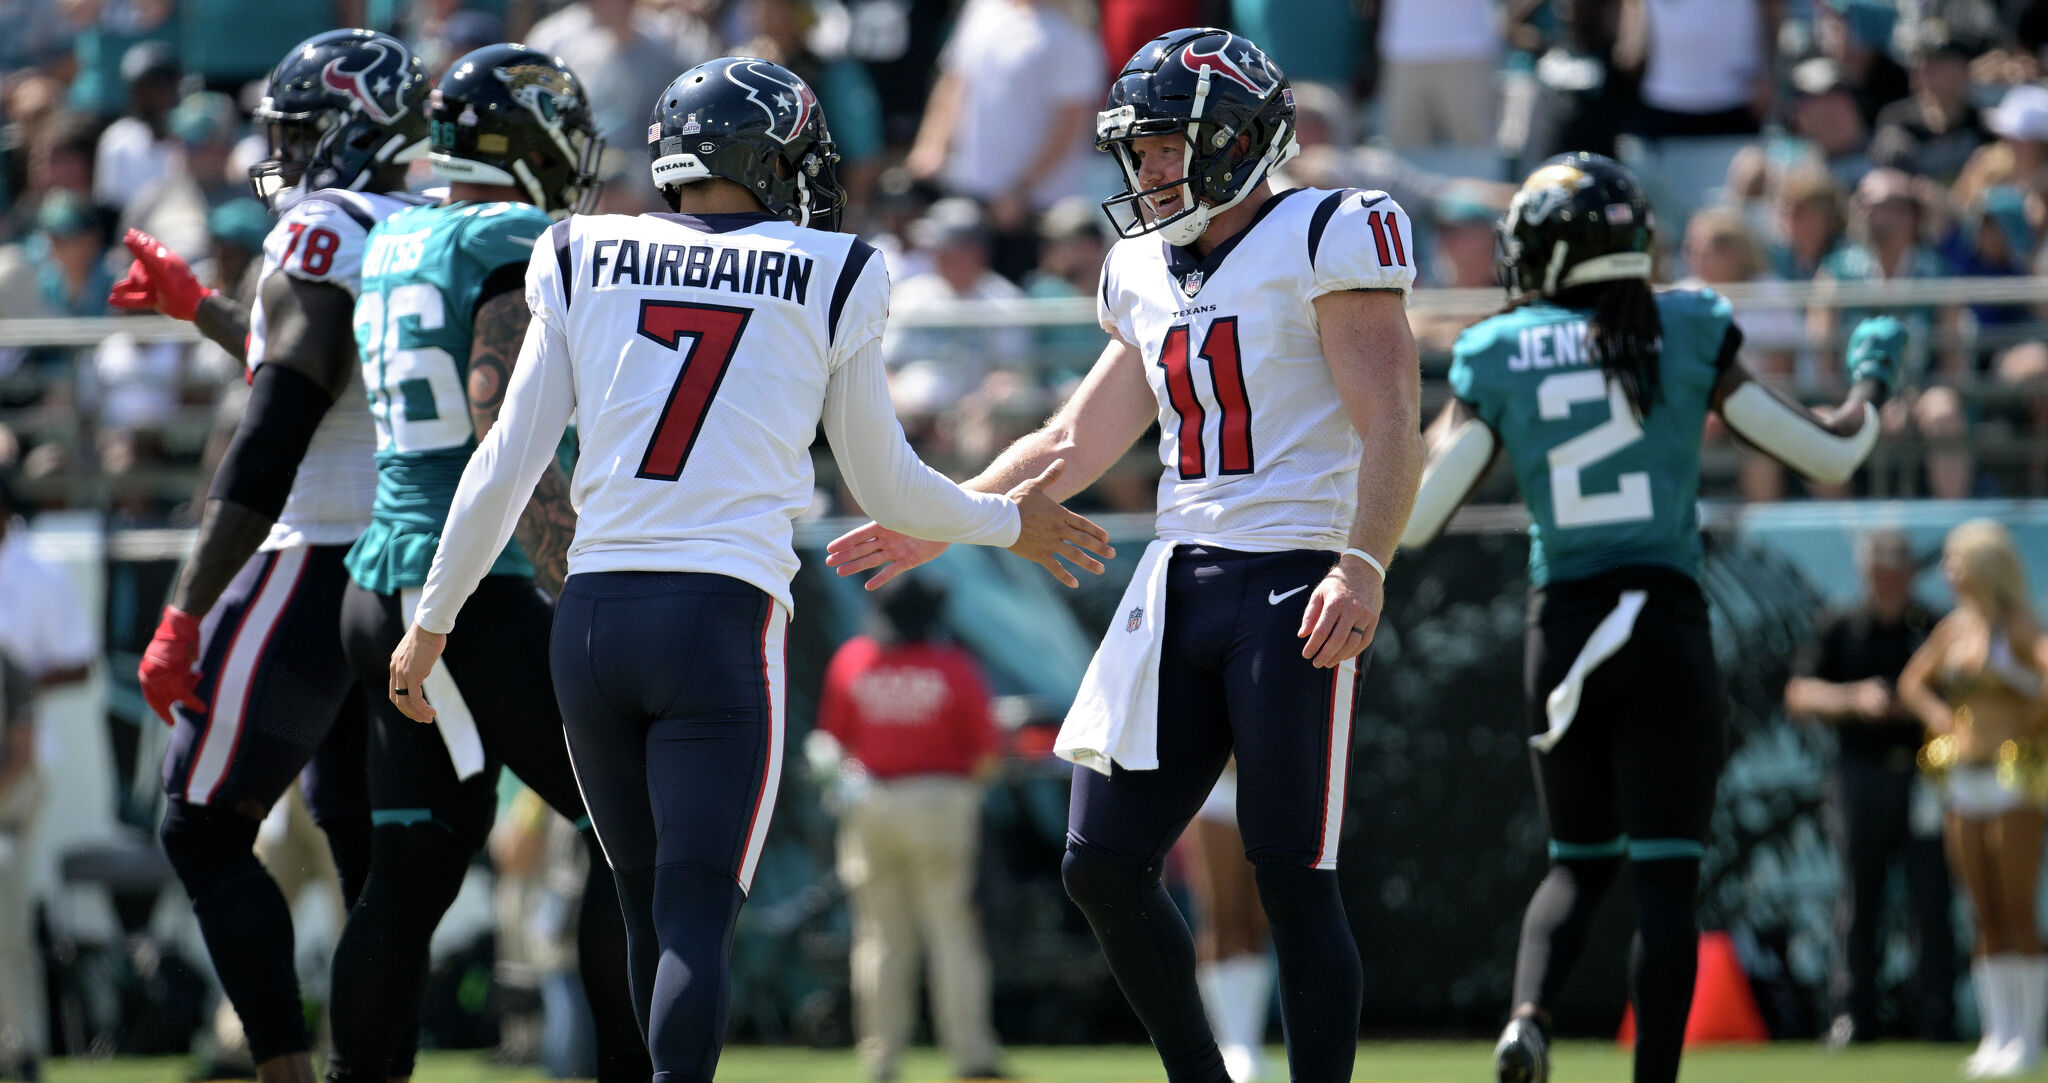 Scenes from Miami Dolphins vs. Houston Texans NFL Week 9